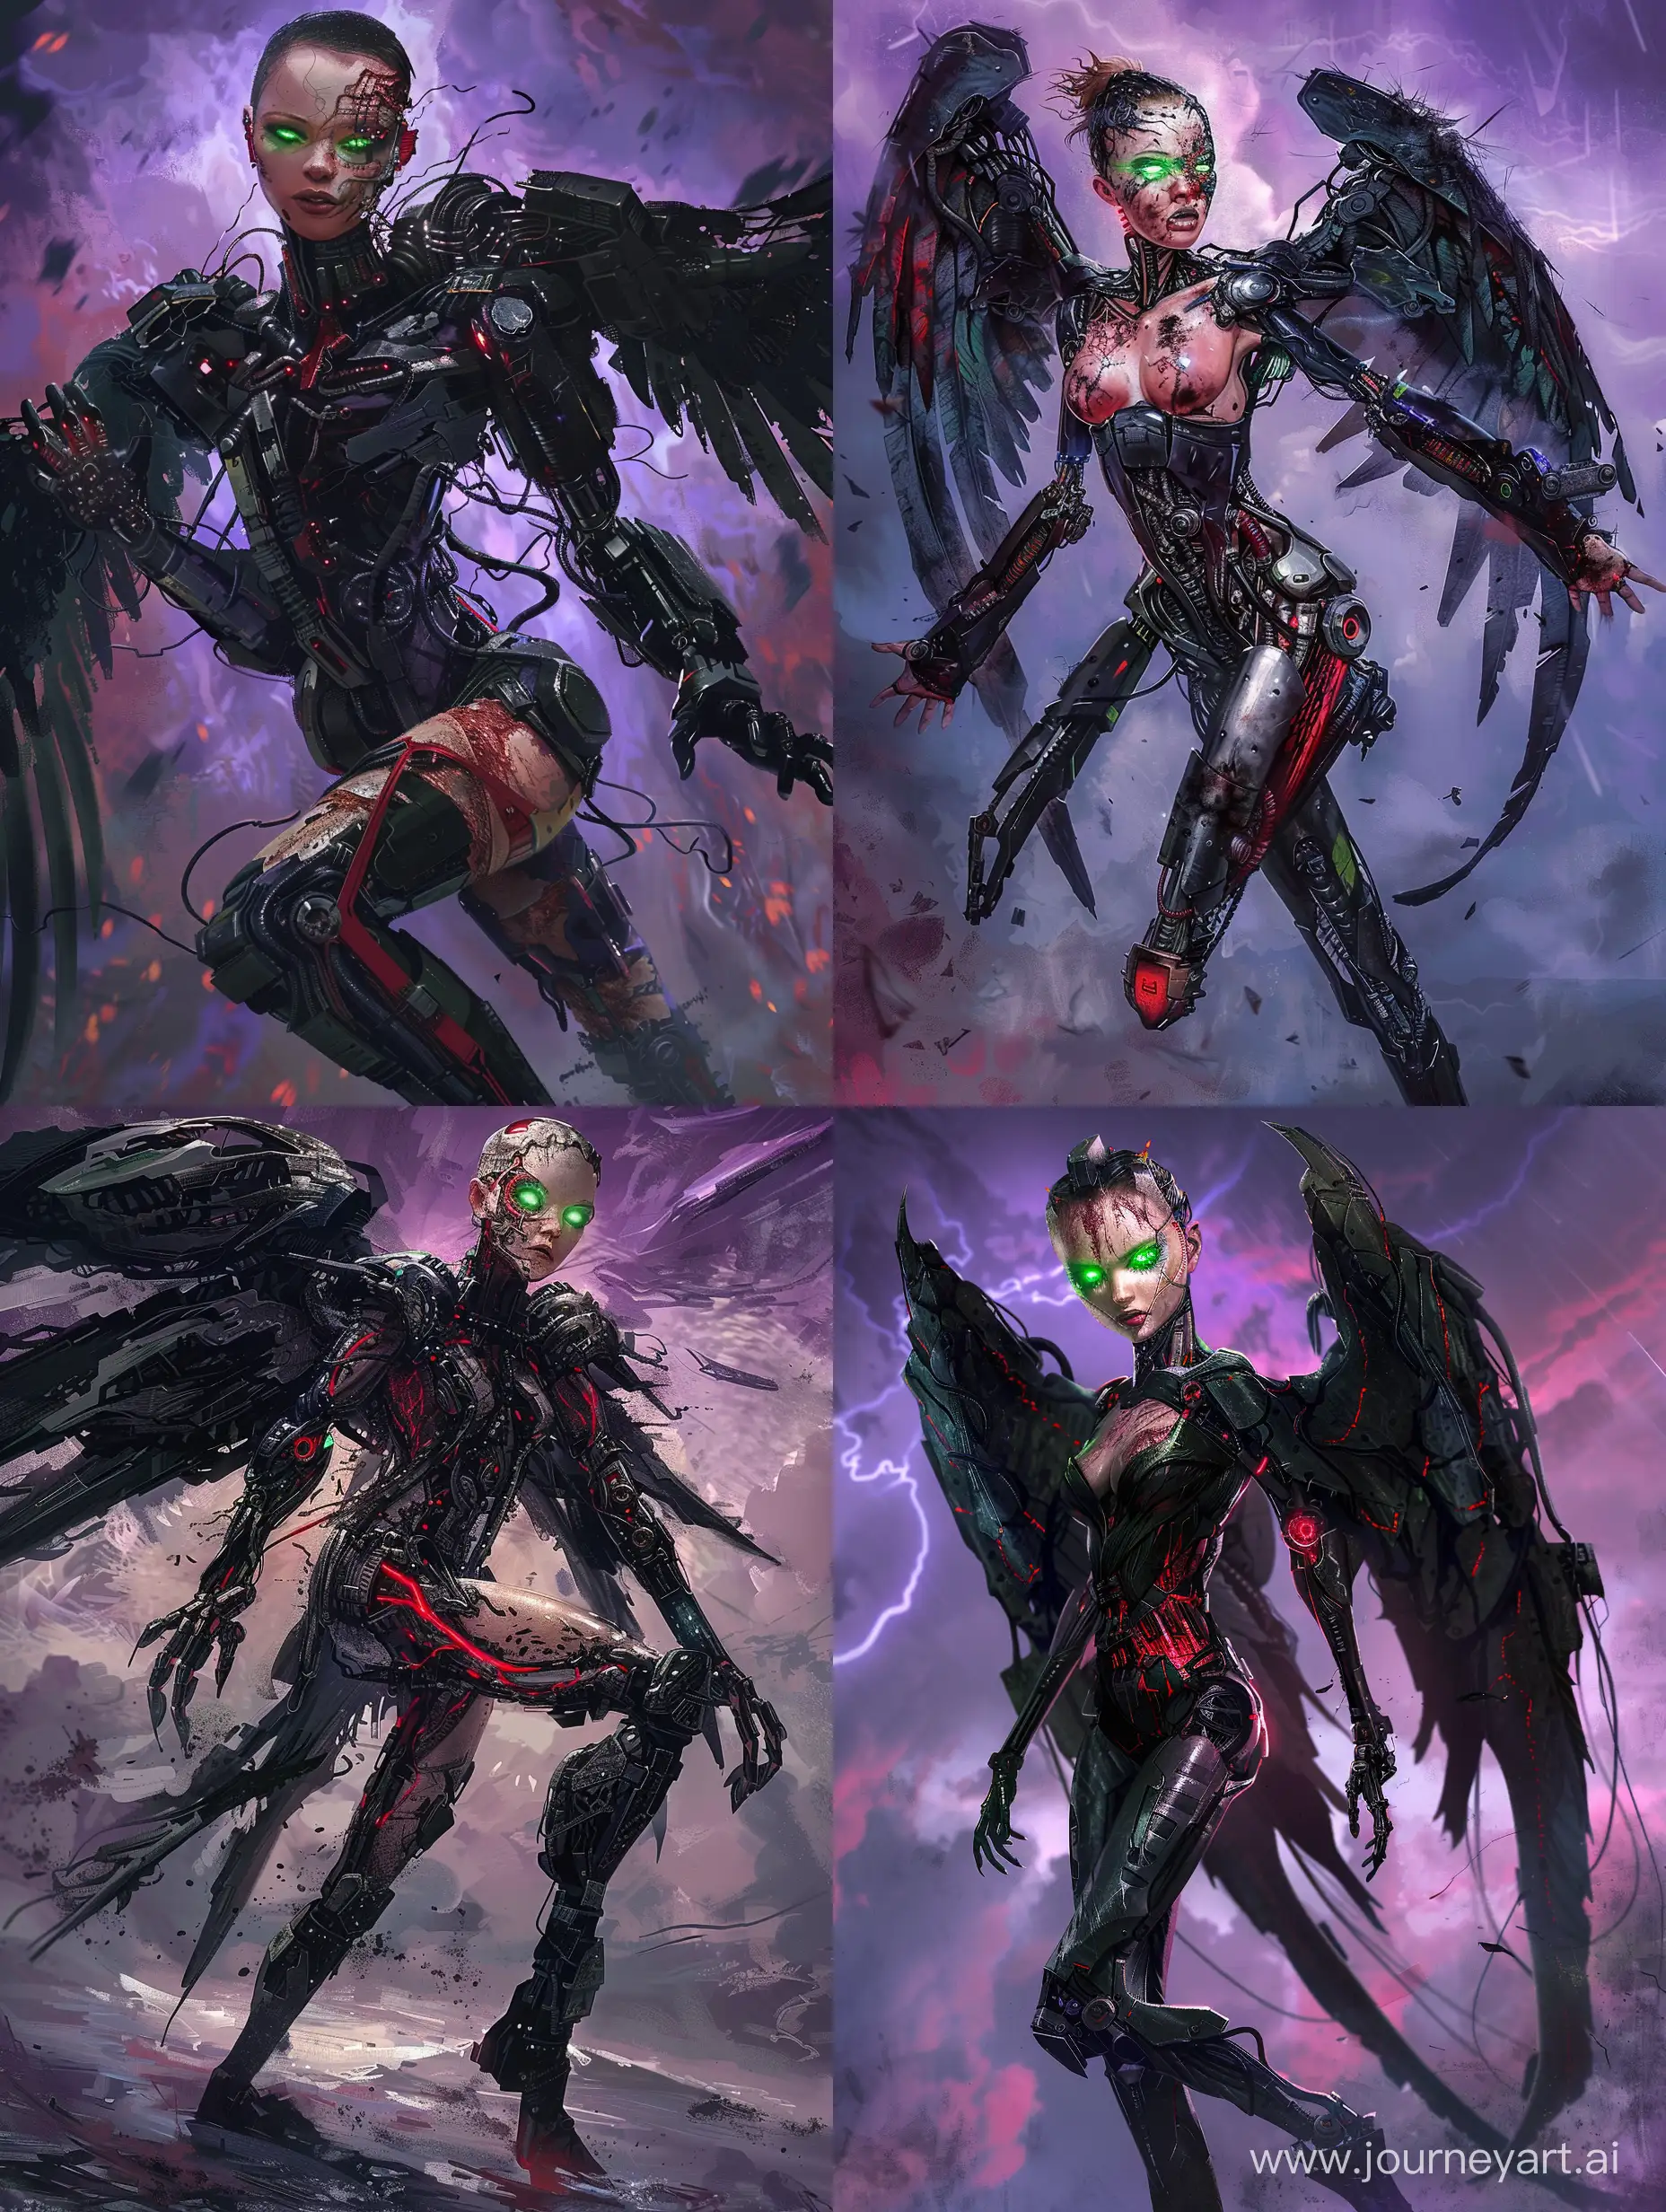 Cyberpunk portrait of a cyborg girl with a scarred face, glowing green eyes, and a black and red cybernetic armor. Her left leg is replaced with a metallic leg, and she has black metallic wings spread wide behind her, exuding a fierce aura. Set against a backdrop of a stormy purple sky.